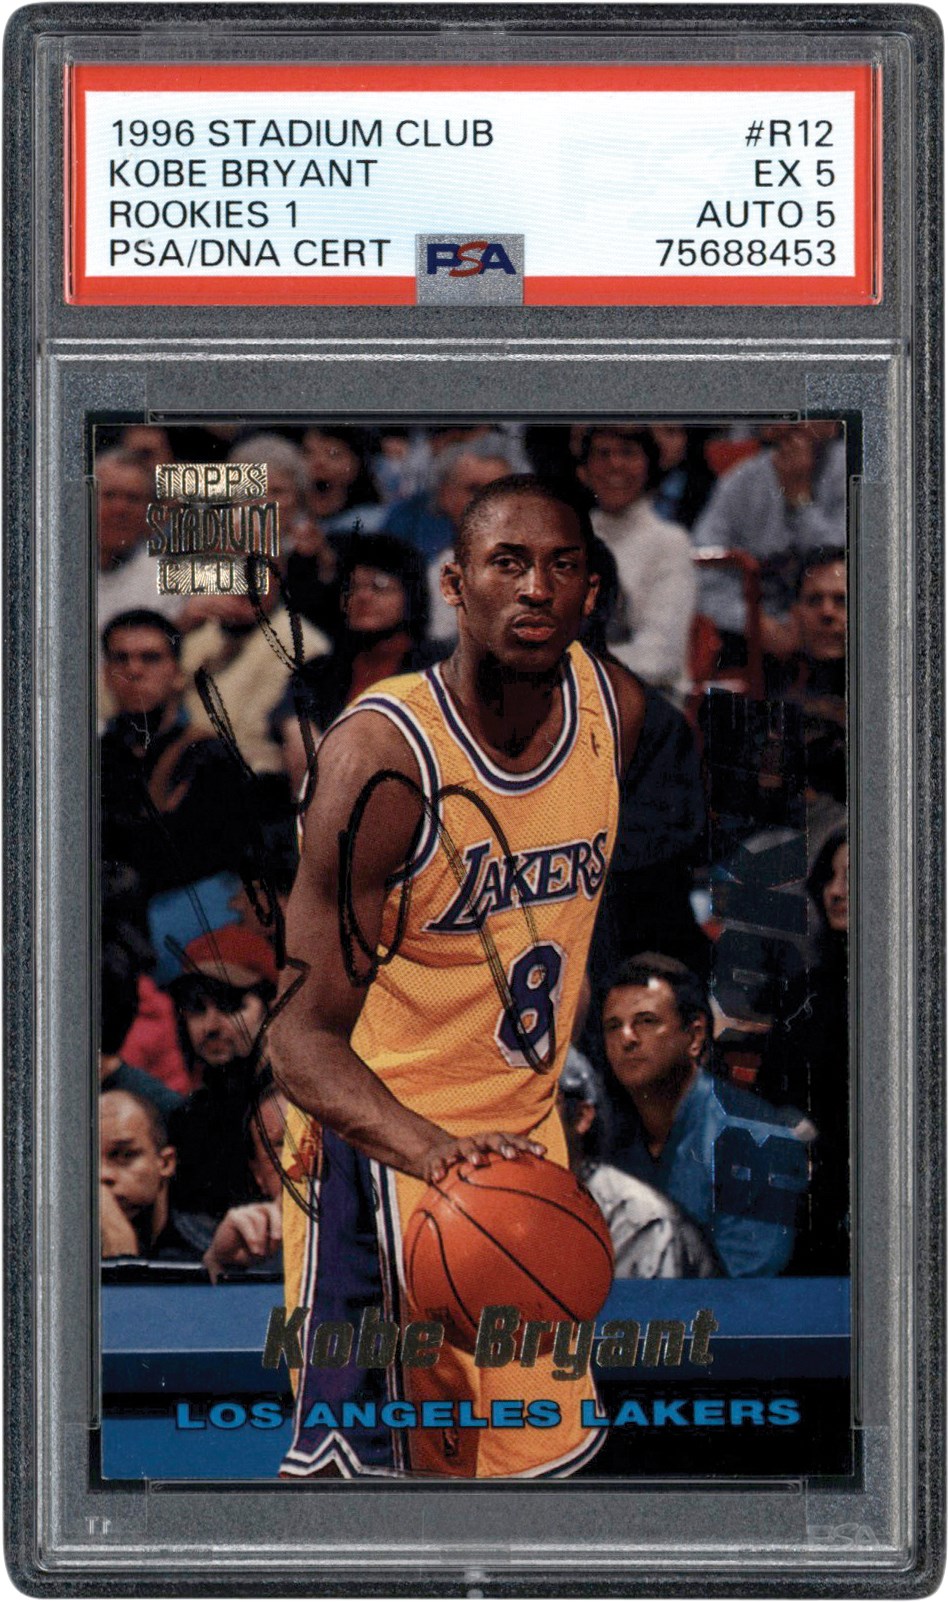 Basketball Cards - 1996 Stadium Club #R12 Kobe Bryant Rookies 1 Signed Rookie Card PSA EX 5 Auto 5 (One of Two Known Examples)